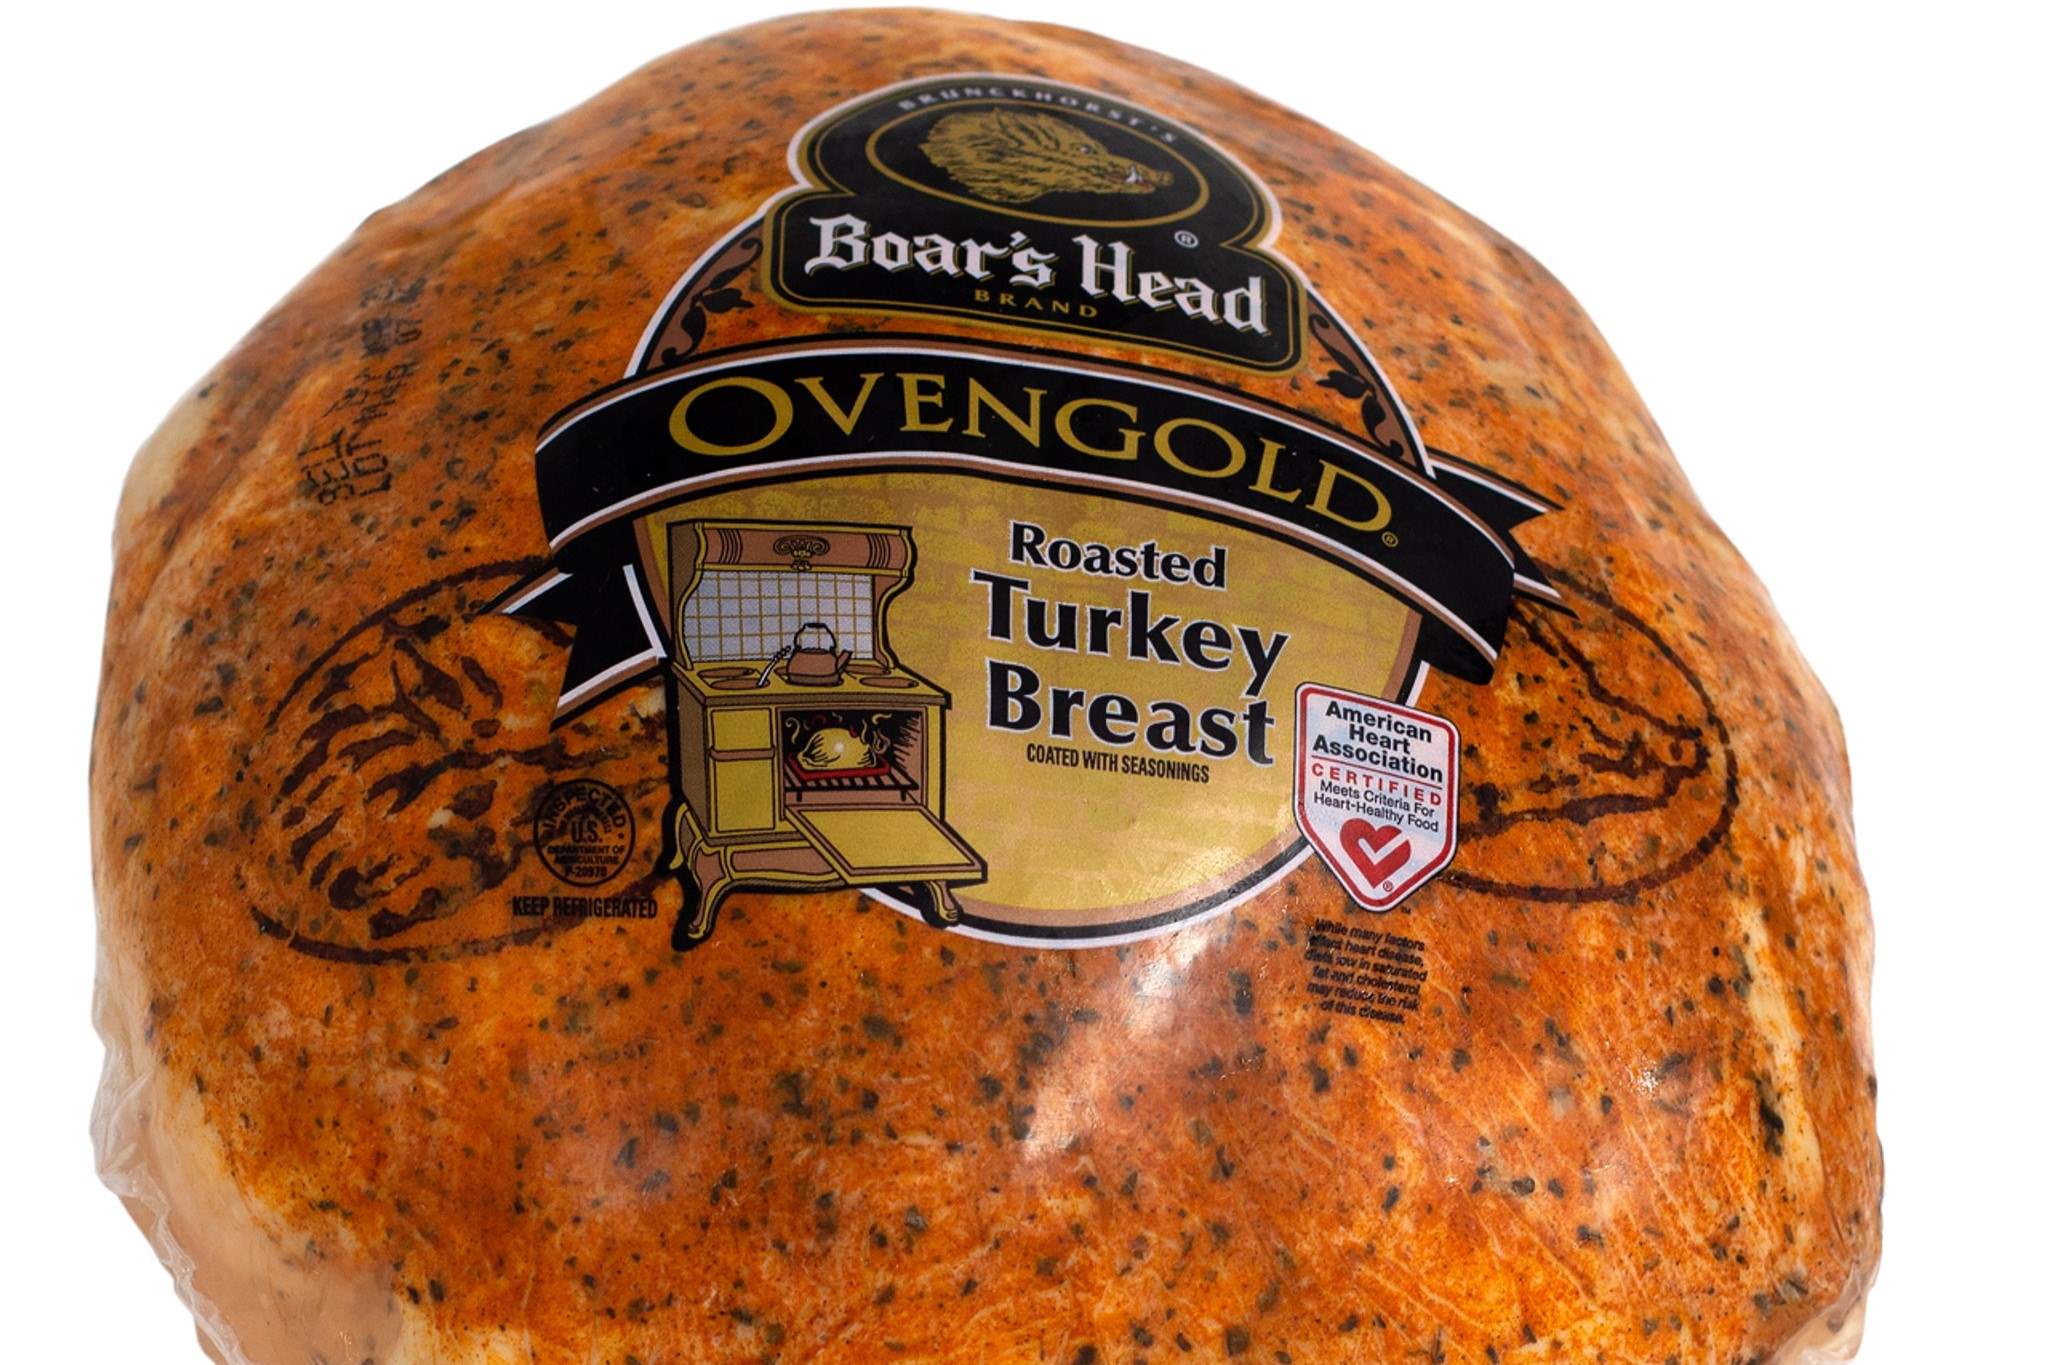 10-boars-head-ovengold-turkey-nutrition-facts